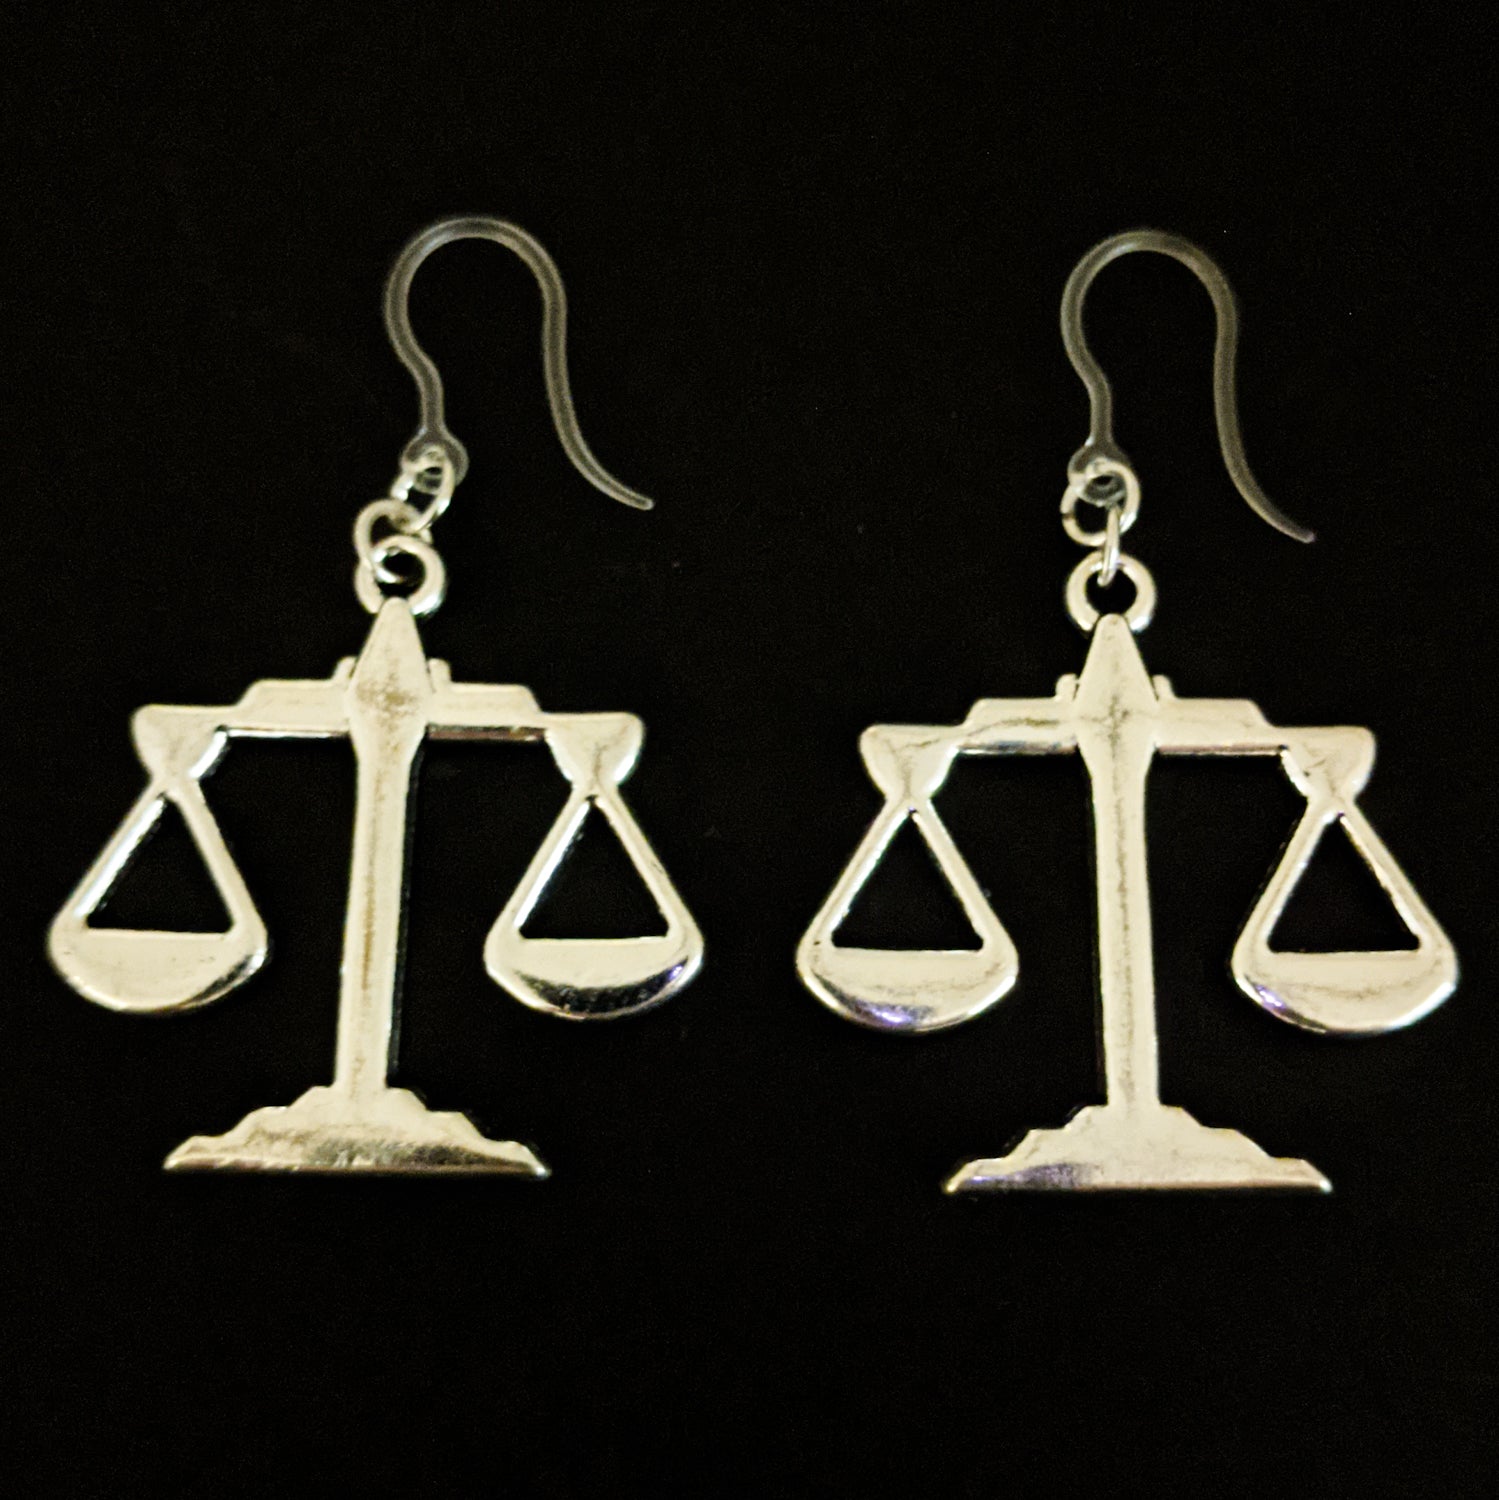 Scales of Justice Earrings (Dangles) - large